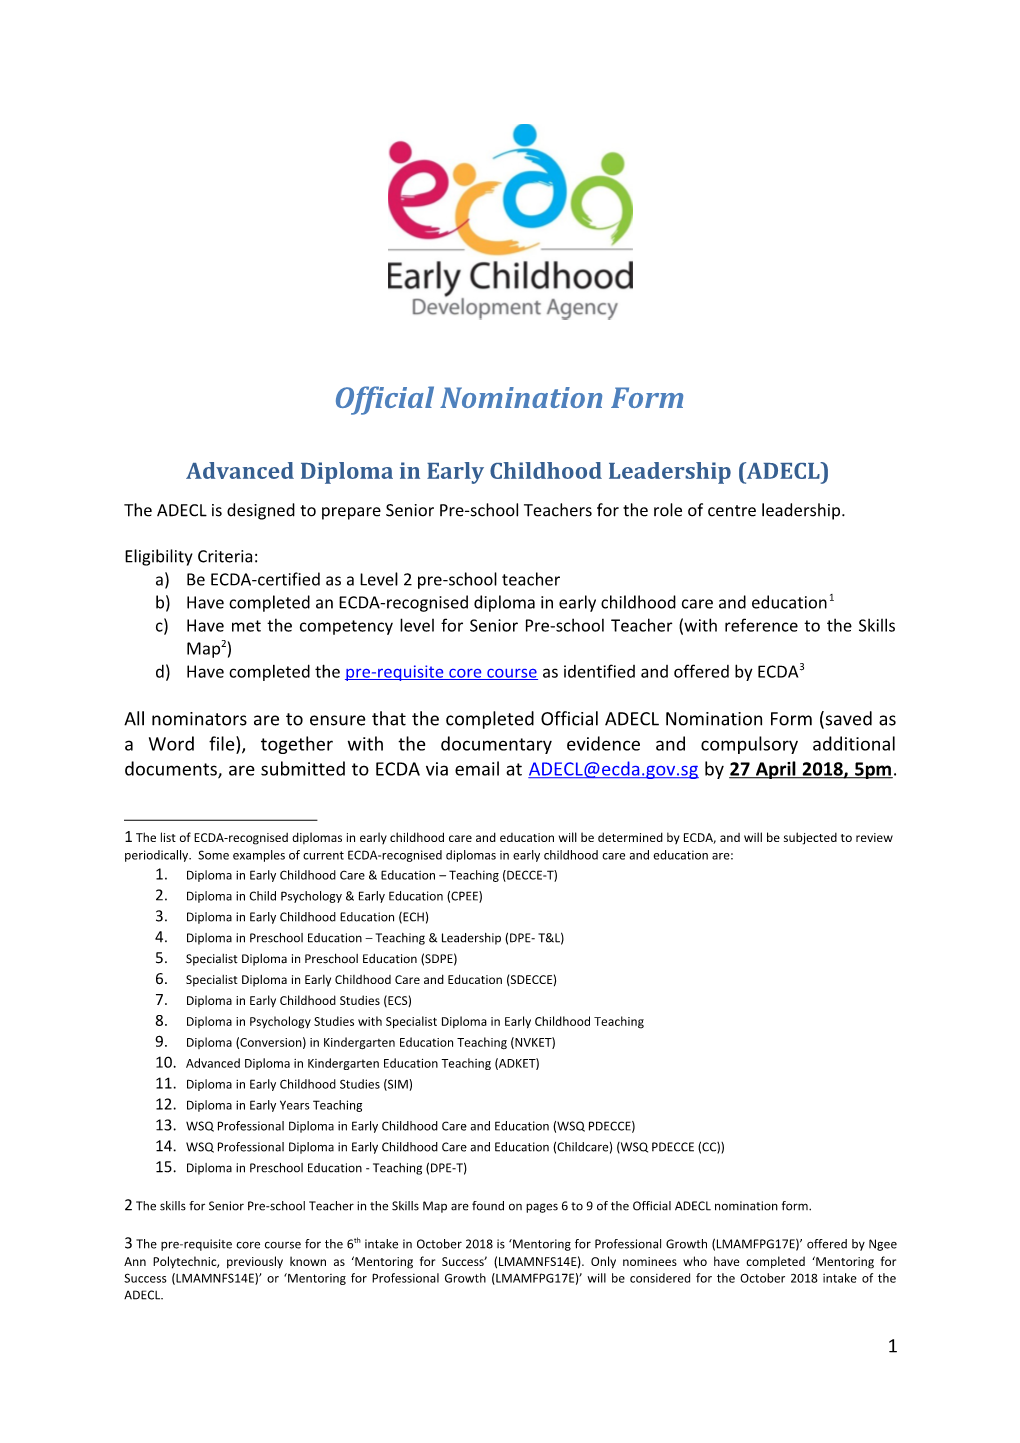 Advanced Diploma in Early Childhood Leadership (ADECL)